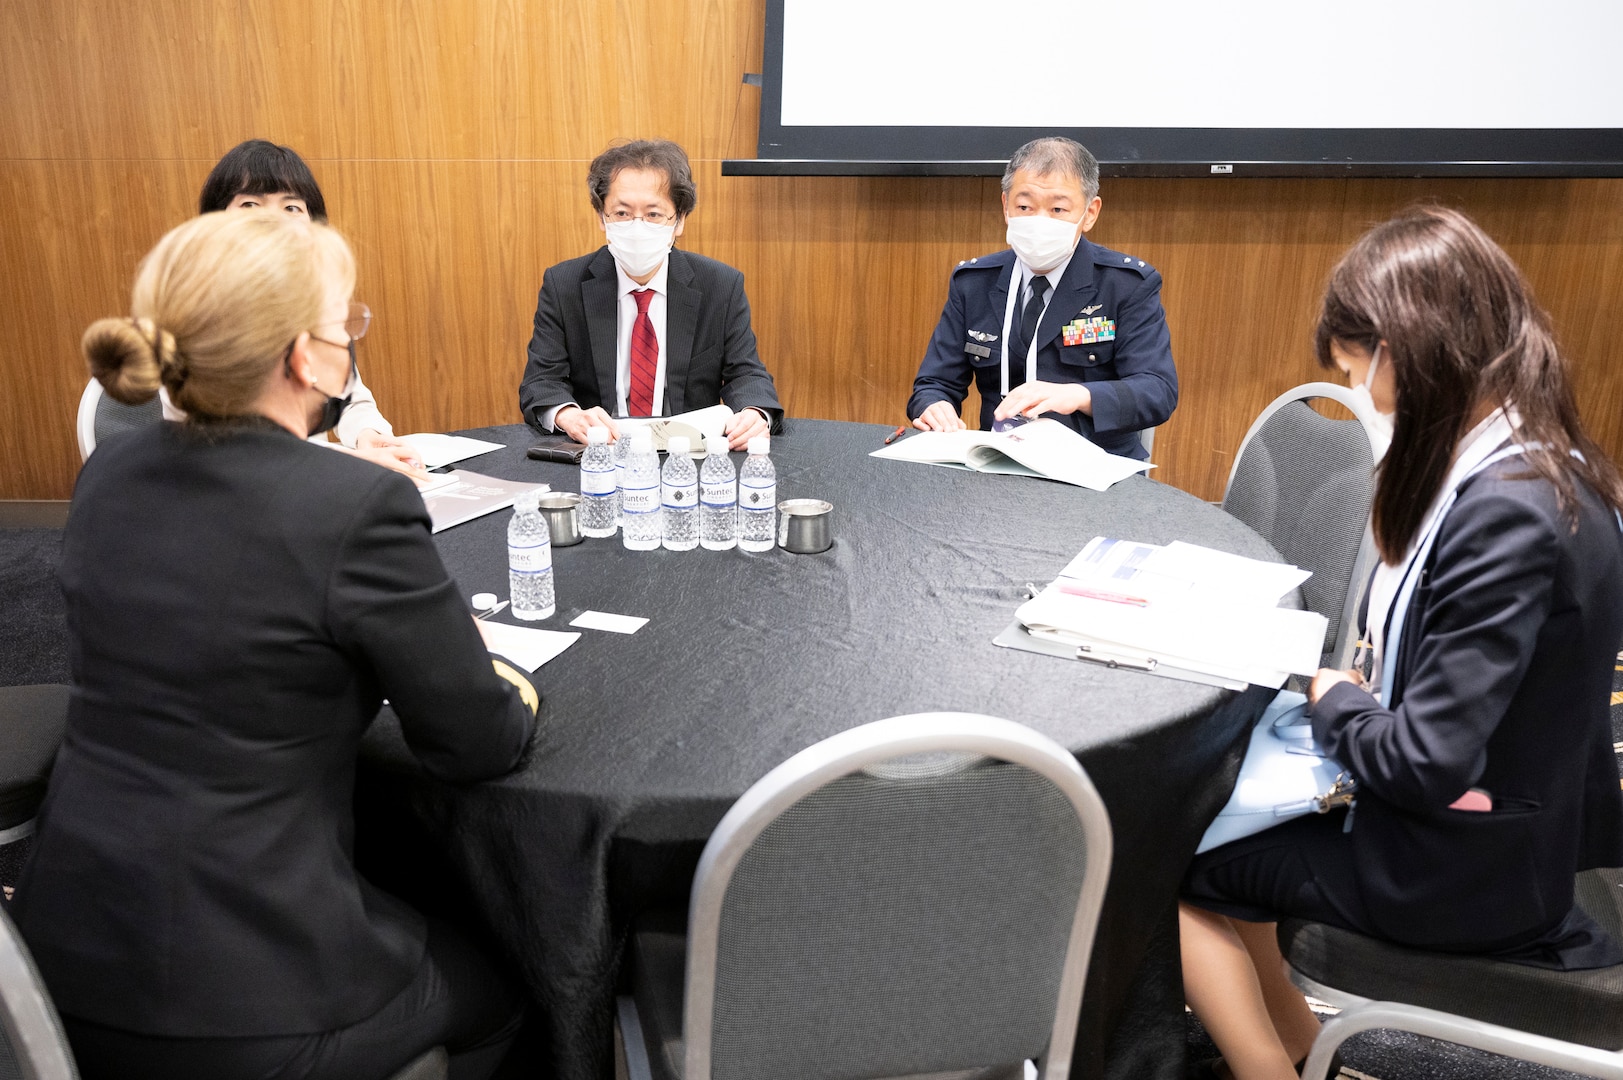 Rear Adm. Pamela Miller (front-left), Command Surgeon for U.S. Indo-Pacific Command, speaks with delegates from Japan during the second Military-Civilian Health Security Summit June 27, 2022, in Singapore. The summit, held June 27-28, focused on regional approaches to global health security through interagency cooperation with allies and partners.